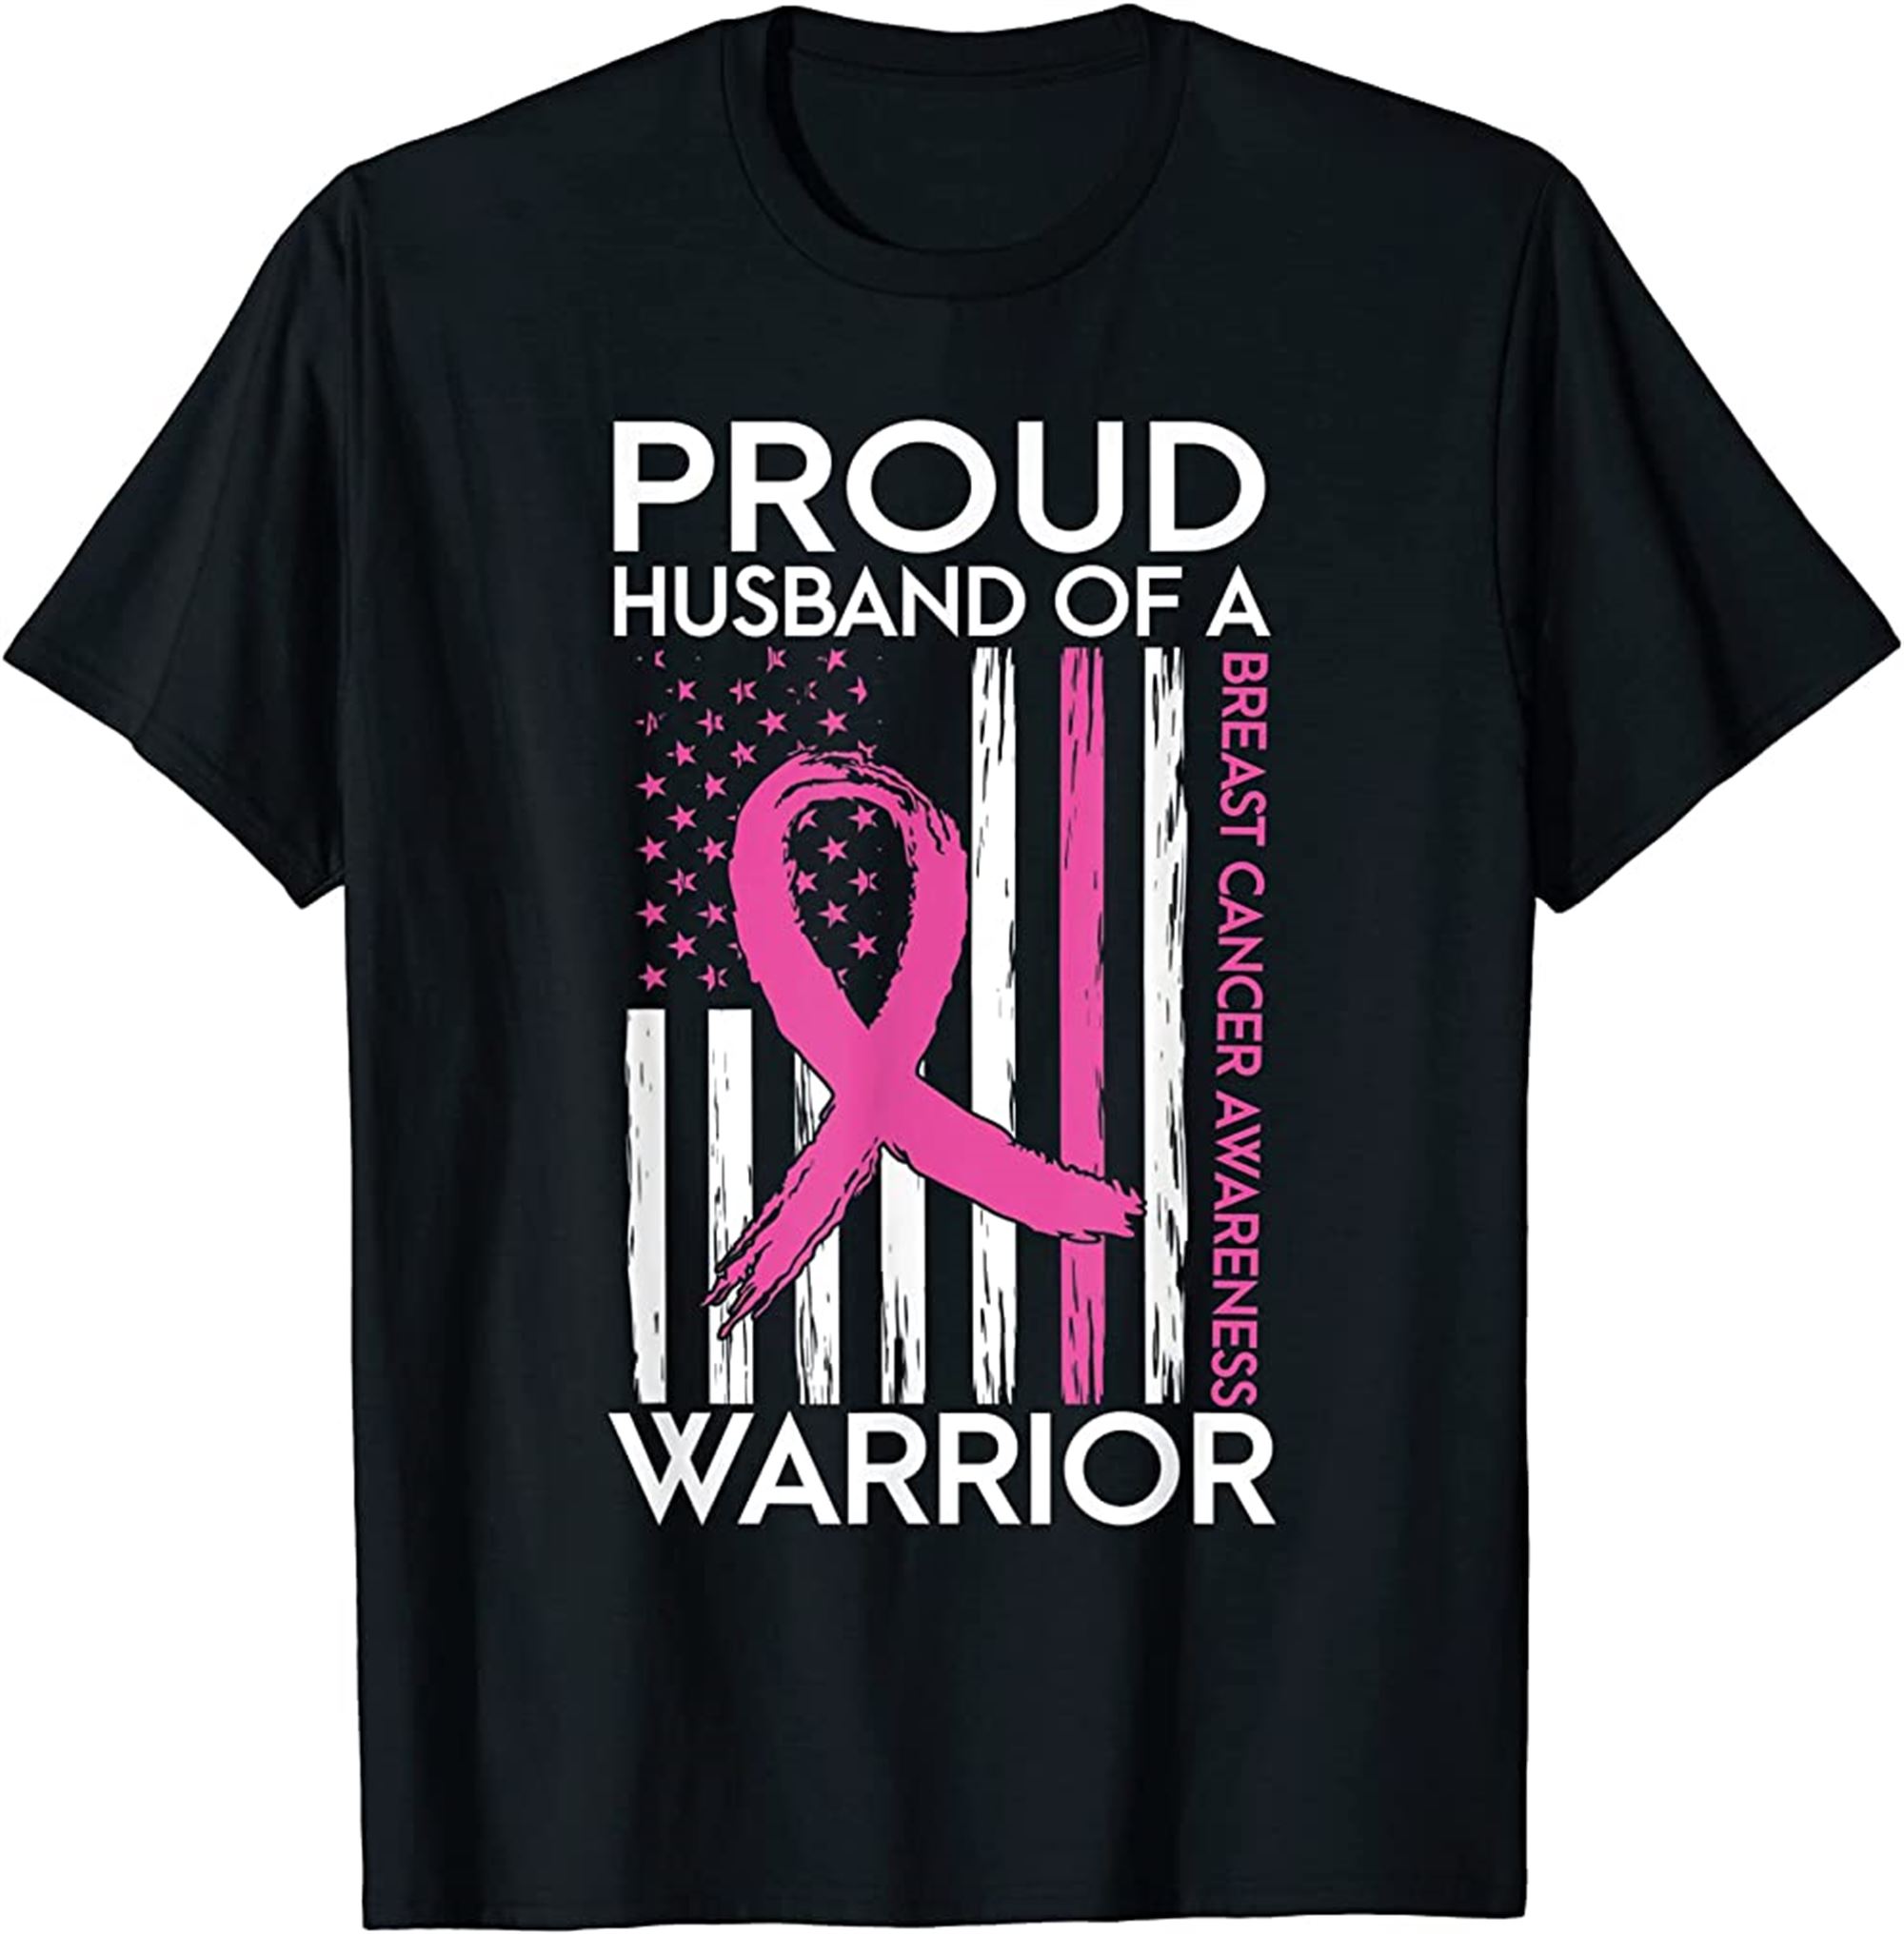 Proud Husband Of A Warrior Breast Cancer Support Squad T-shirt Size Up To 5xl